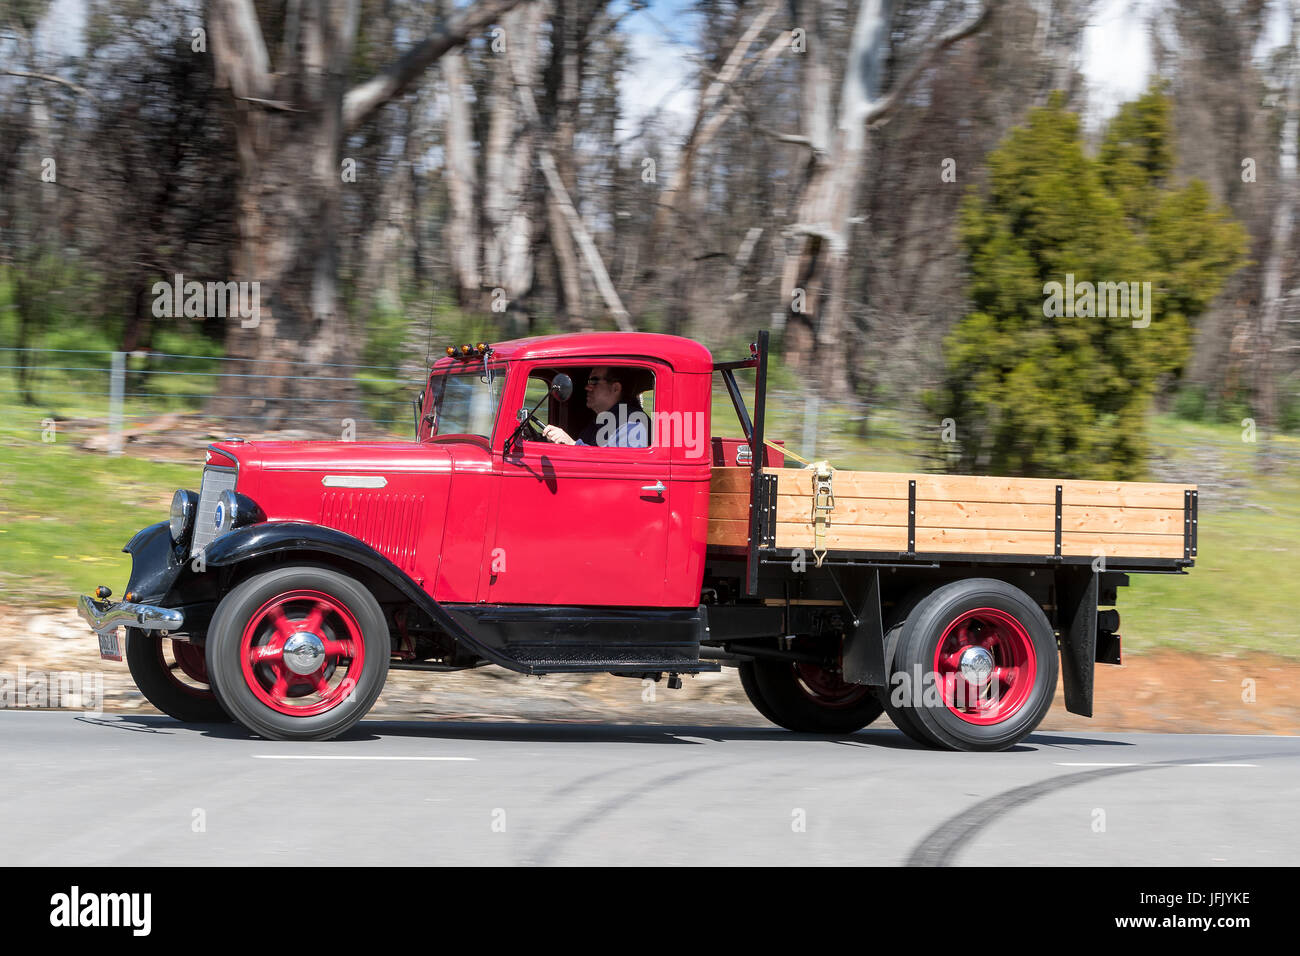 Vintage 1936 International Harvester C-30 Truck driving on country roads near the town of Birdwood, South Australia. Stock Photo